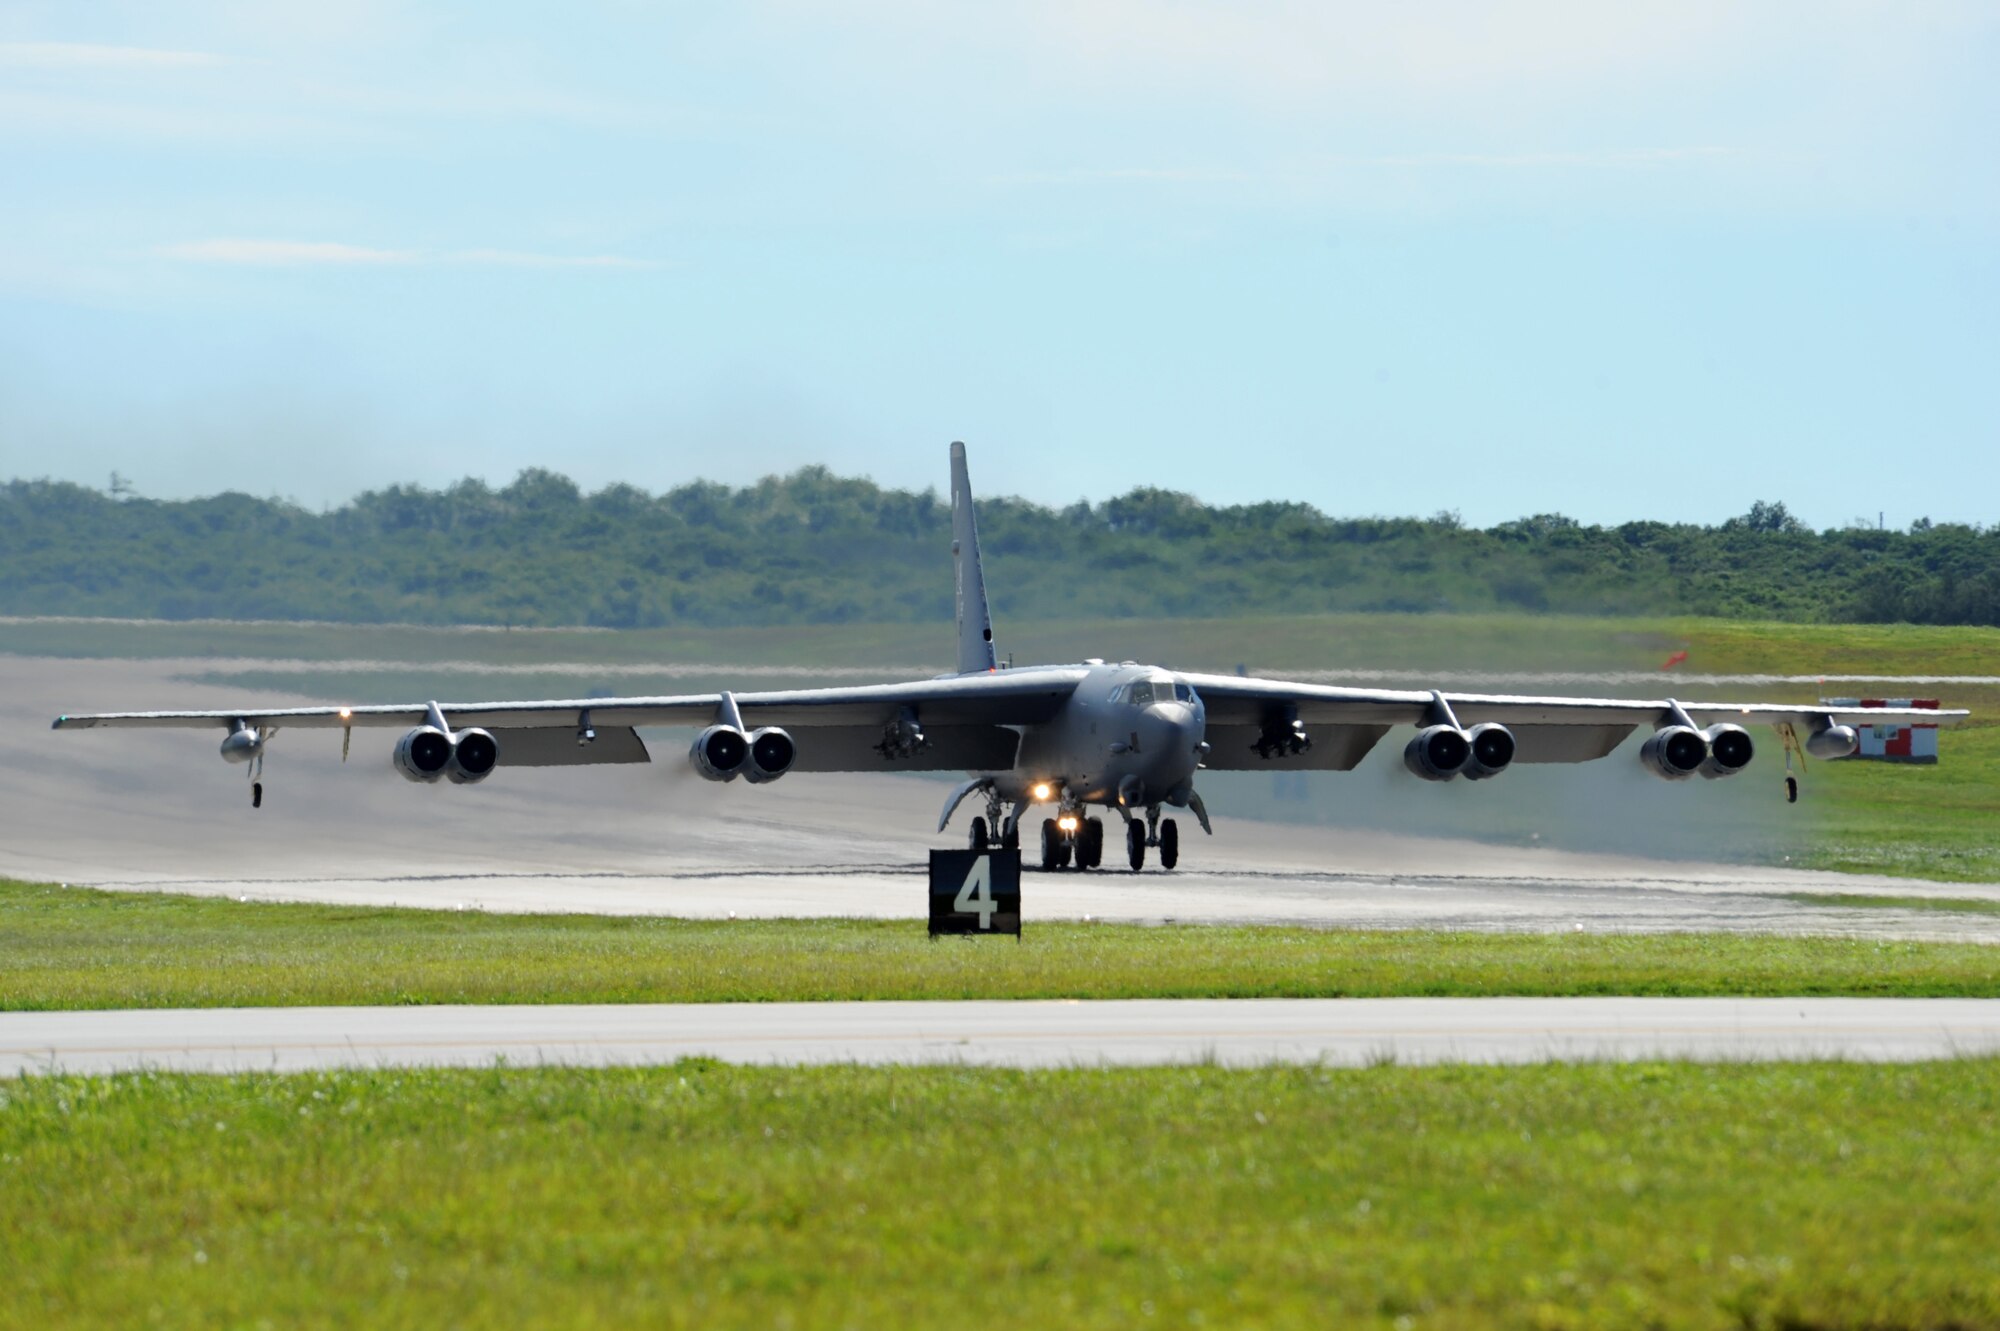 A B-52 Bomber deployed from Barksdale Air Force Base, La., takes off from Andersen Air Force Base runway in support of Exercise Valiant Shield. Valiant Shield is a training exercise with a focus on integration and proficiency of the U.S. Army, Navy, Air Force and Marine Corps through engaging units at sea, in the air, on land, and in cyberspace in response to the mission. (U.S. Navy photo by Mass Communication Specialist 2nd Class Chelsy Alamina)